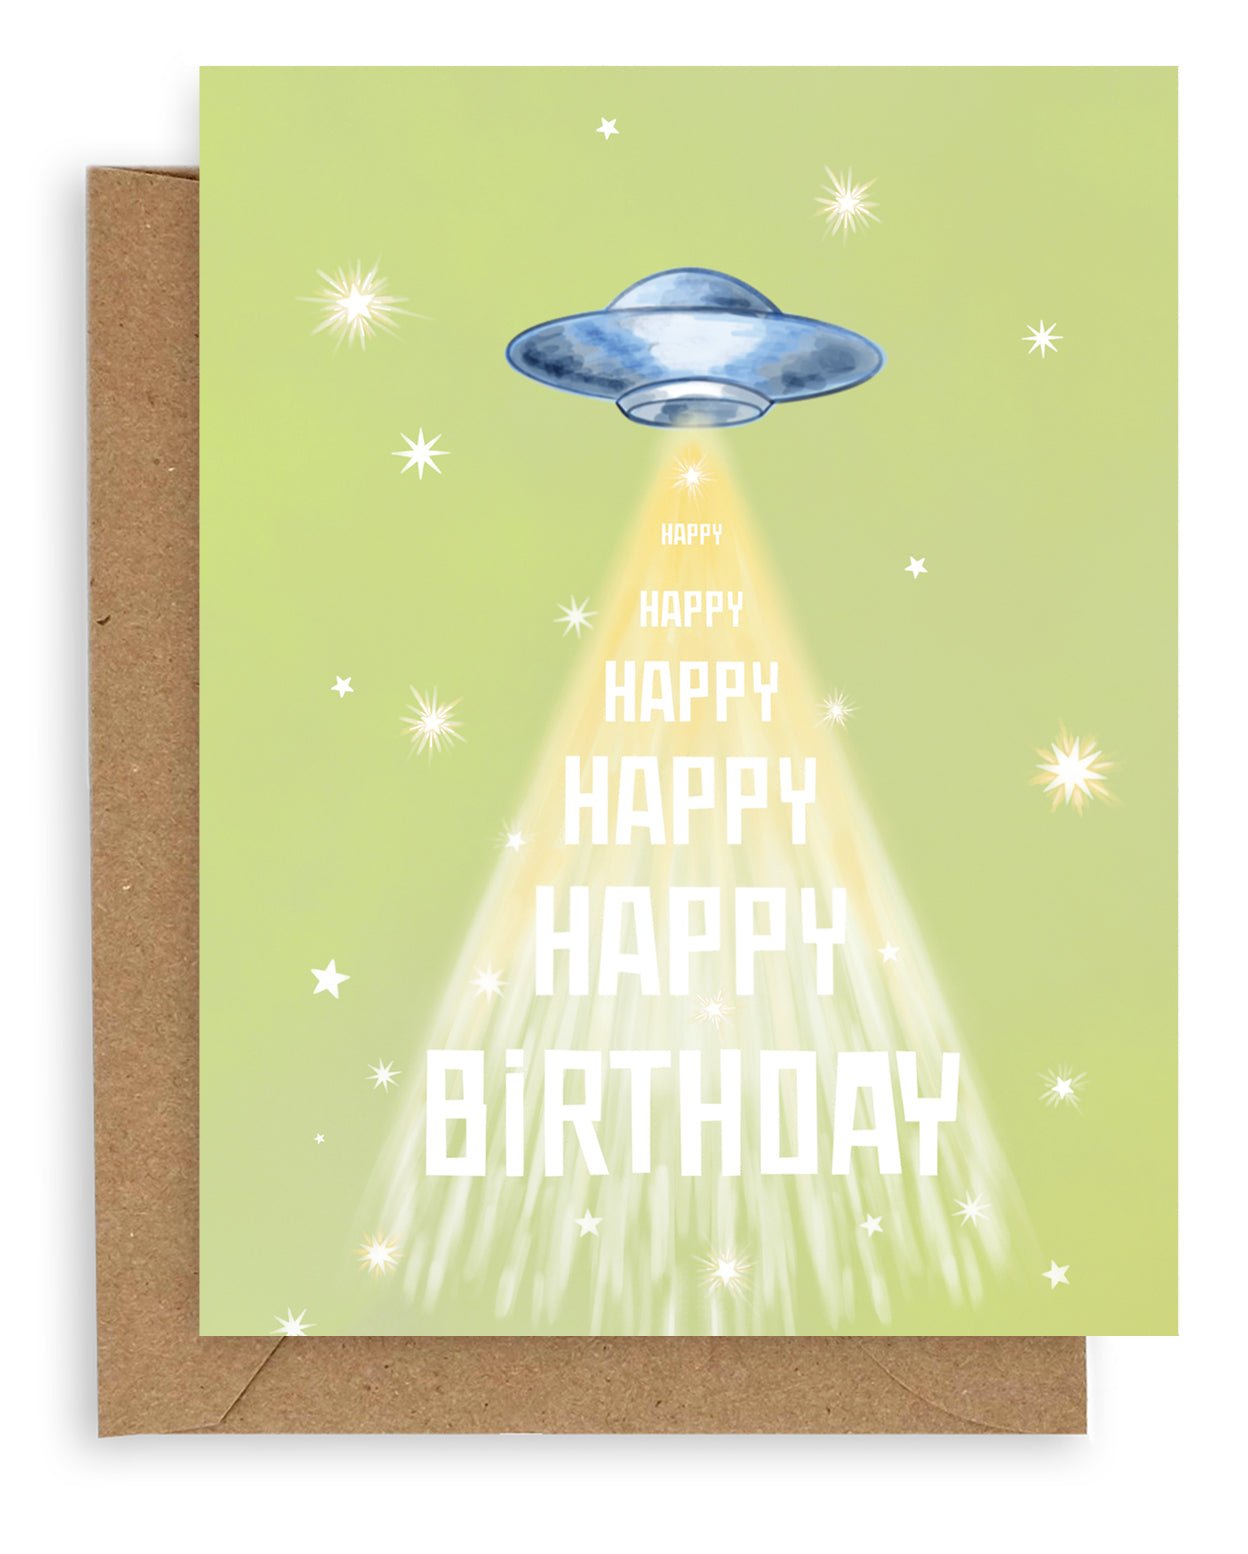 Greeting card with green background featuring stars and flying saucer with "happy birthday" printed down the front. Shown with kraft envelope.